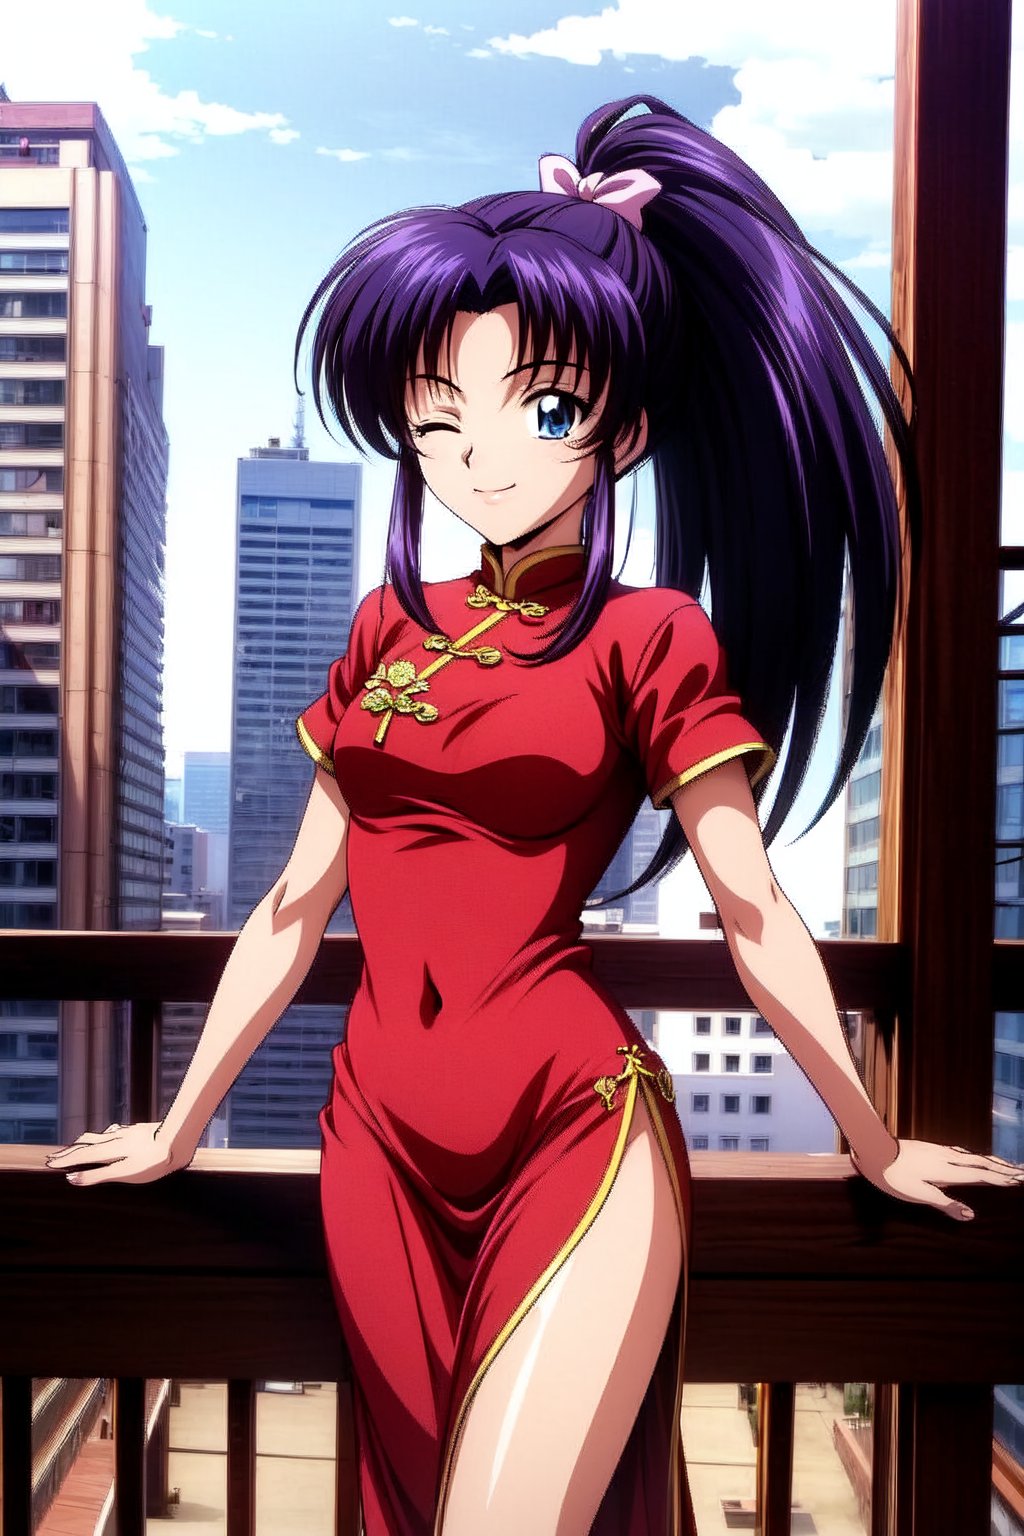 Kamiya kaoru 1996, solo, 1girl, beautiful 20 year old anime girl with: "athletic body, long legs, (properly proportioned female body), medium bust, blue eyes (a little closed smiling eyes), black hair, long hair tied with bow in a high ponytail"; wear chinese clothes,; smiling shyly, stand on the city,hair flying in the wind; legs focus, in high quality, 8k, High Definition, HD, sakura_pattern, Kamiya Kaoru 1996